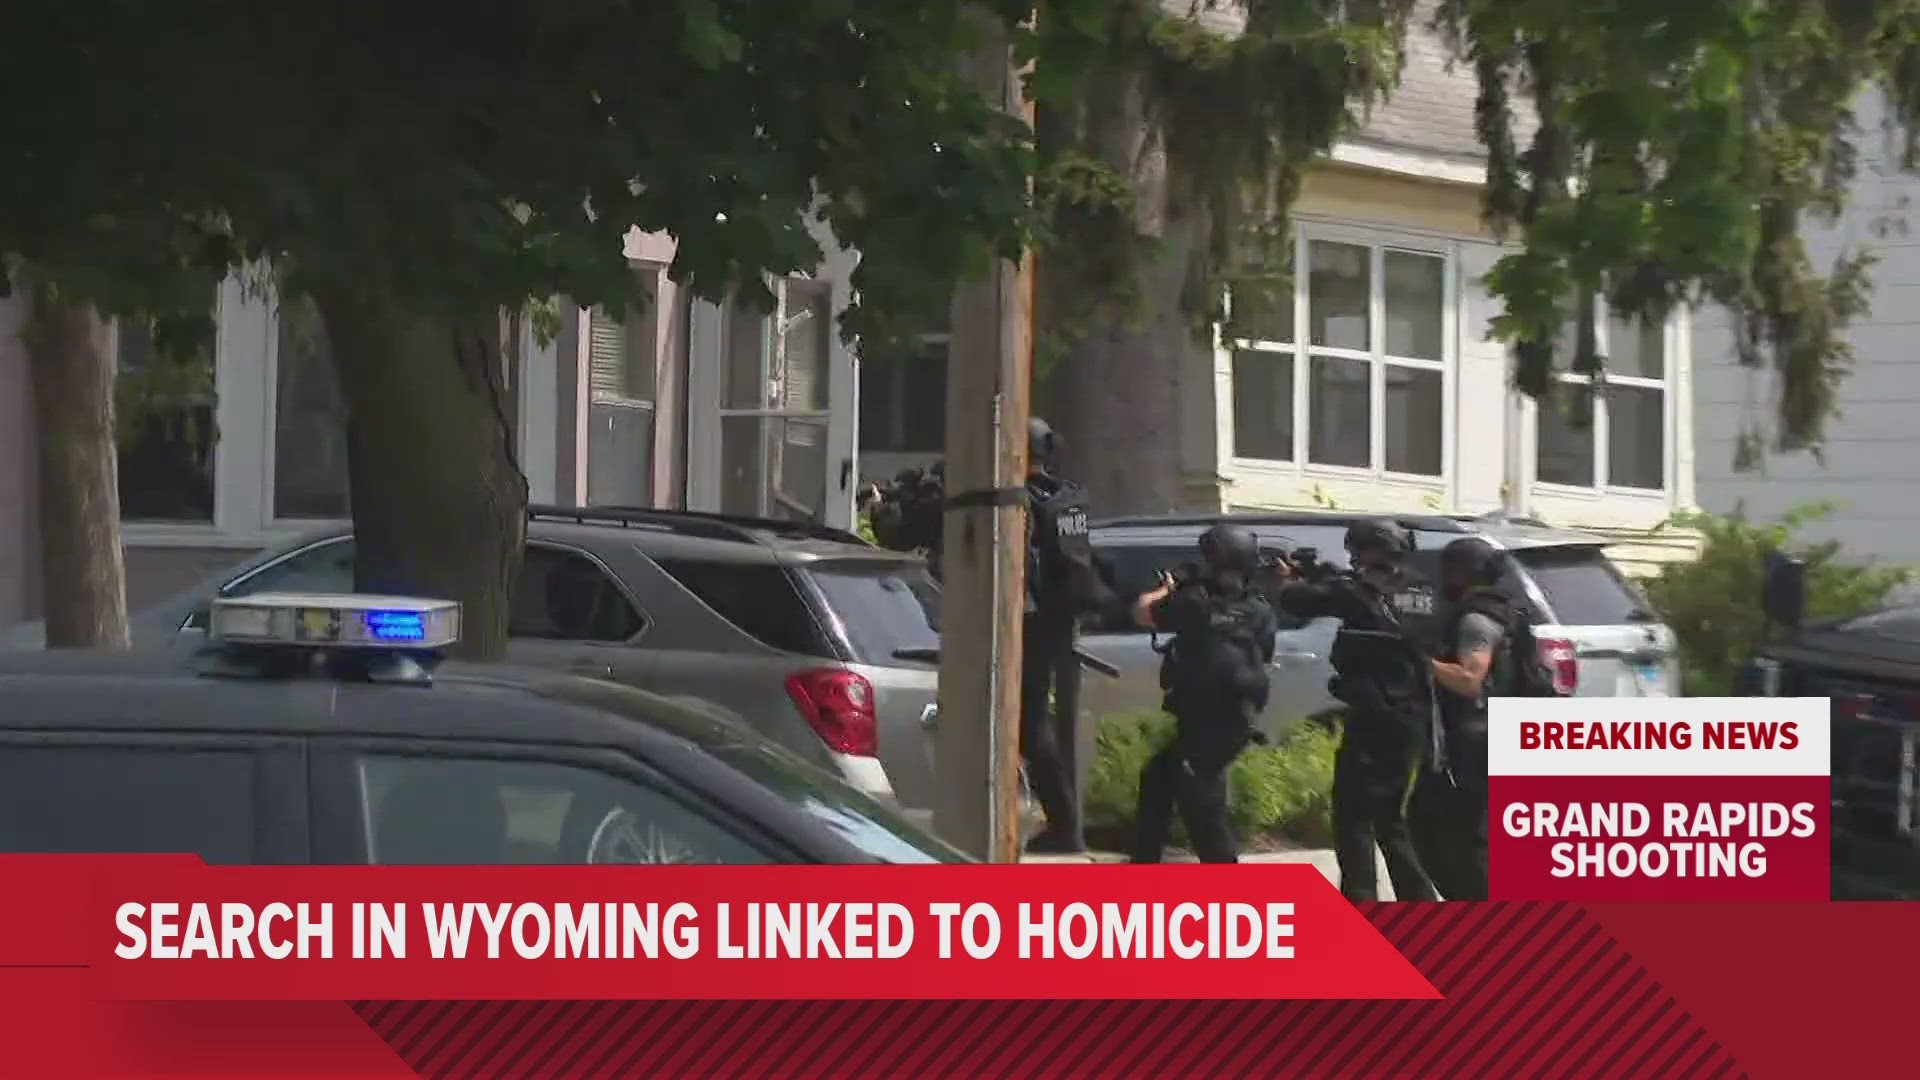 Law enforcement in Wyoming surrounded a home linked to a person of interest in a Grand Rapids homicide case.